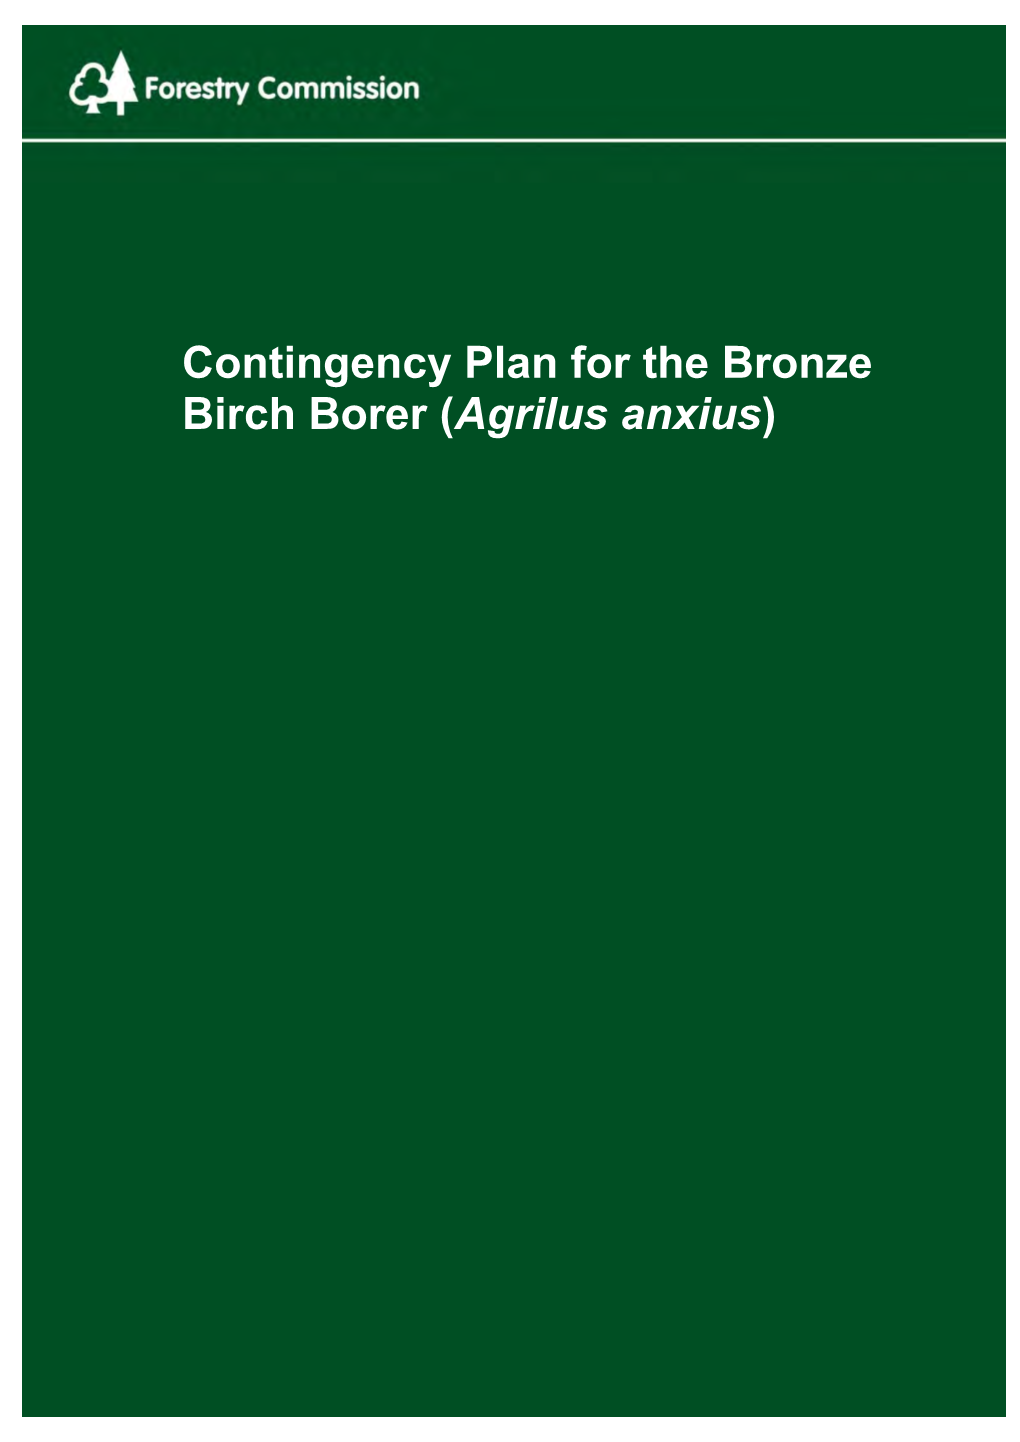 Contingency Plan for the Bronze Birch Borer (Agrilus Anxius)